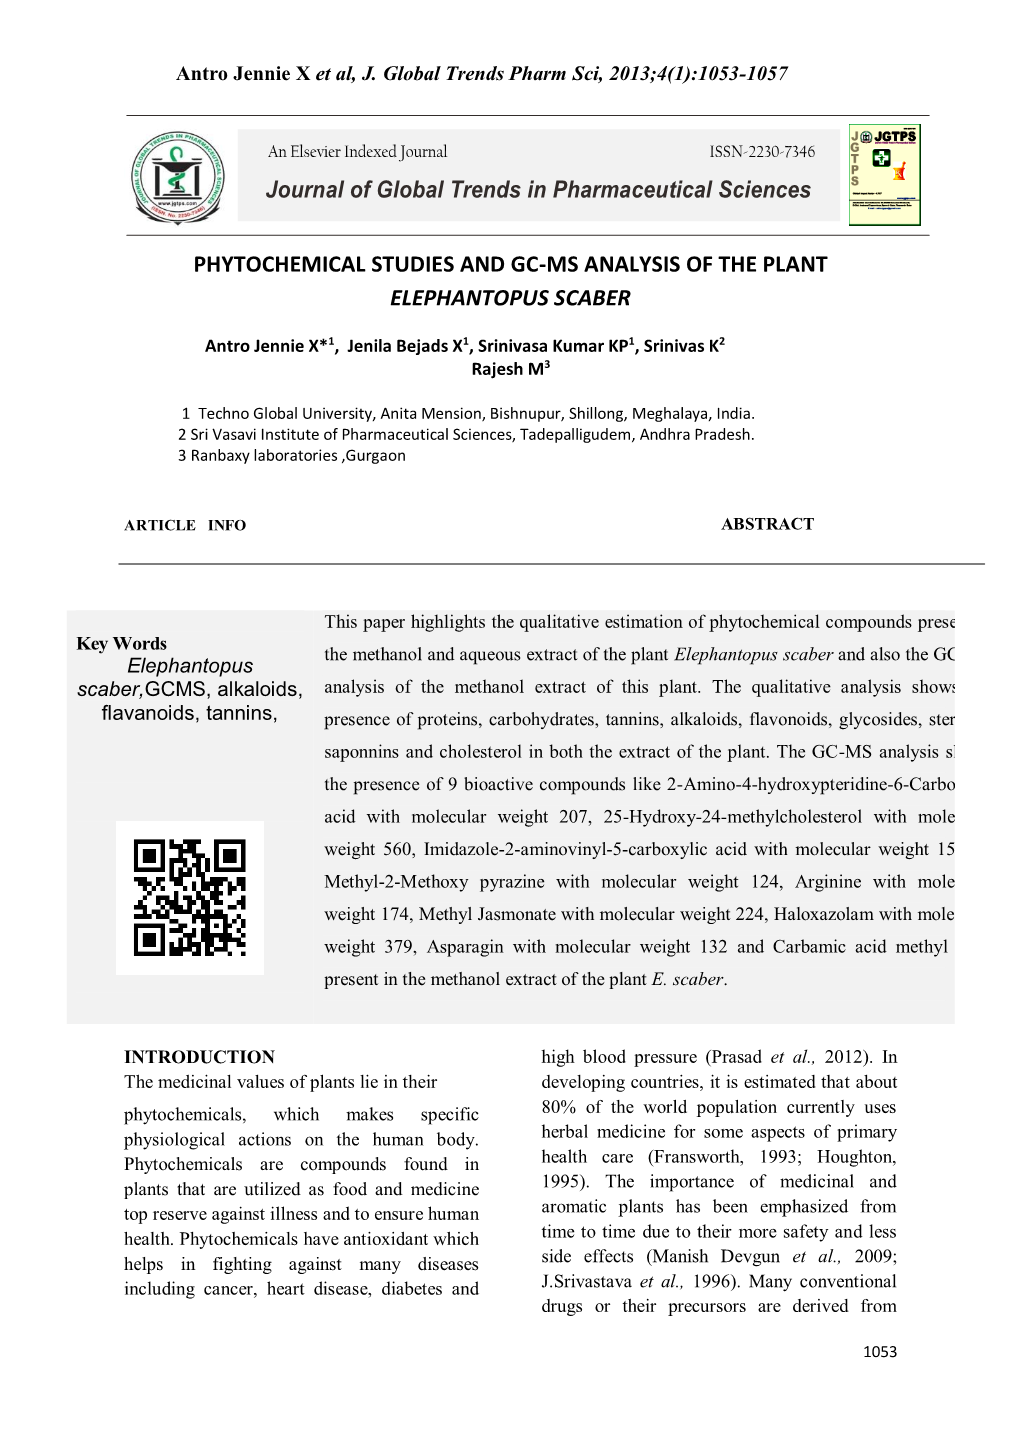 Phytochemical Studies and Gc-Ms Analysis of the Plant Elephantopus Scaber